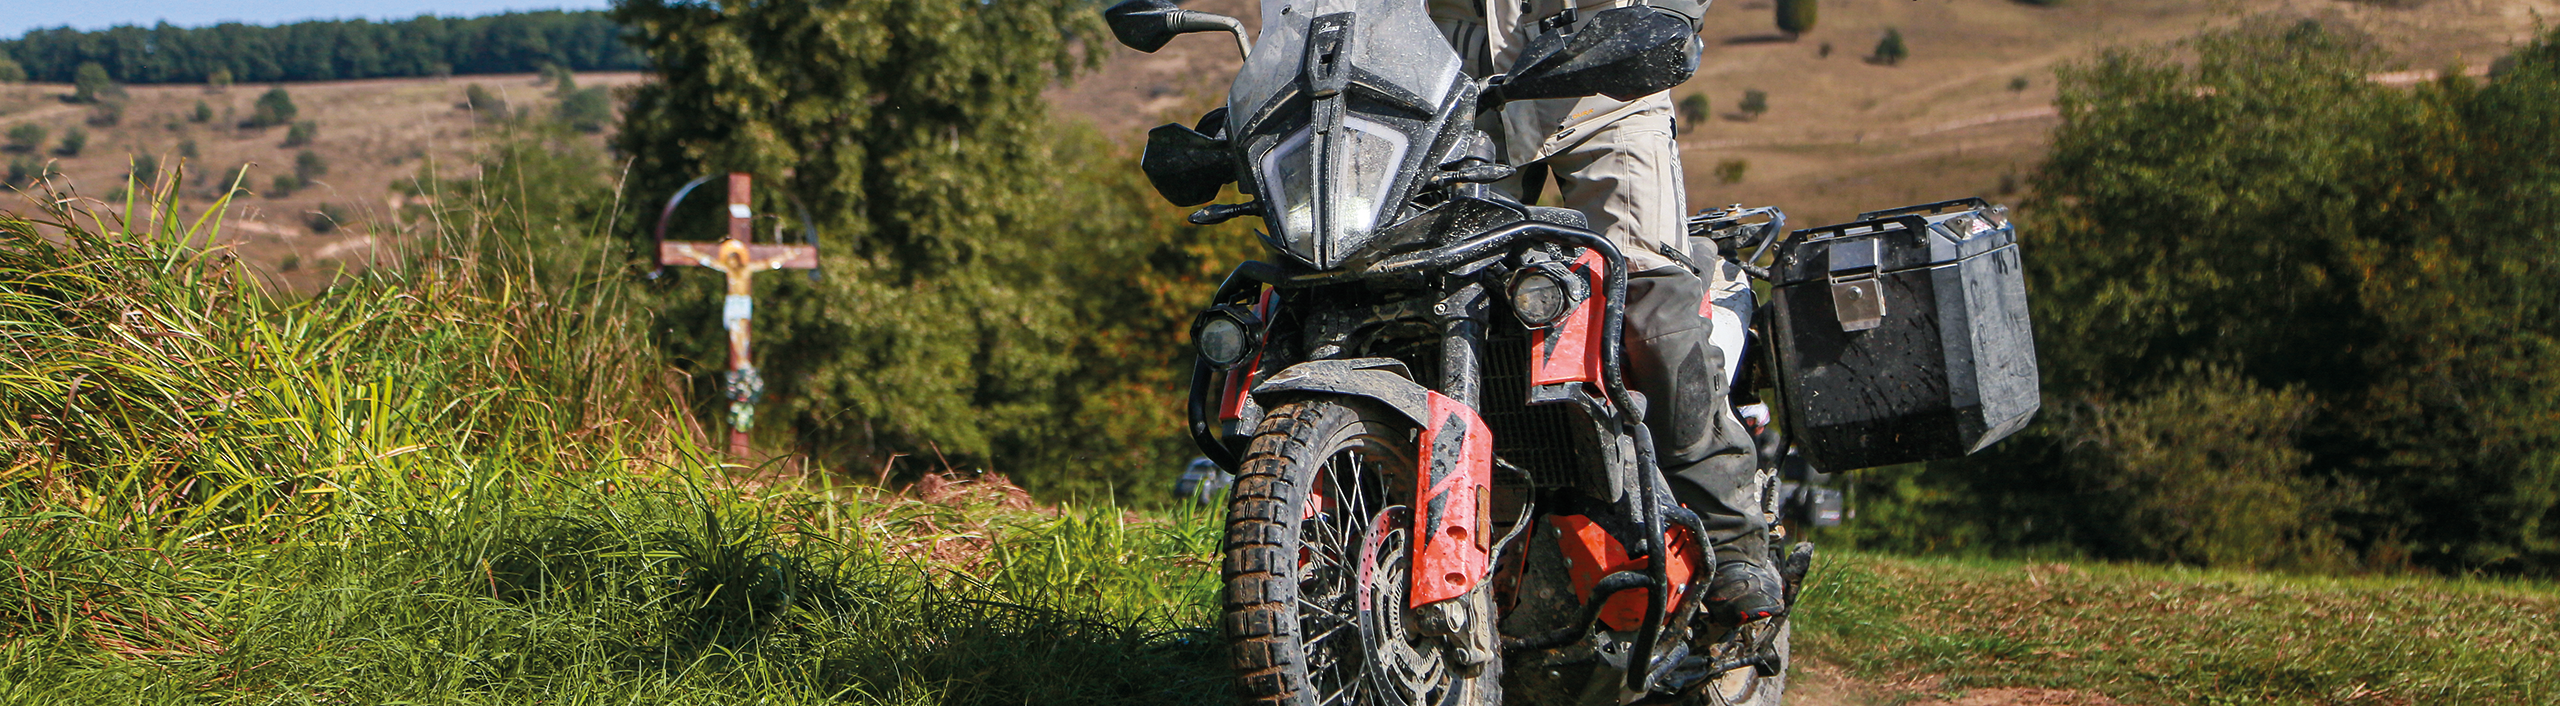 Zieger Builds Motorcycle Accesory Excellence- For Want of a Better Bracket